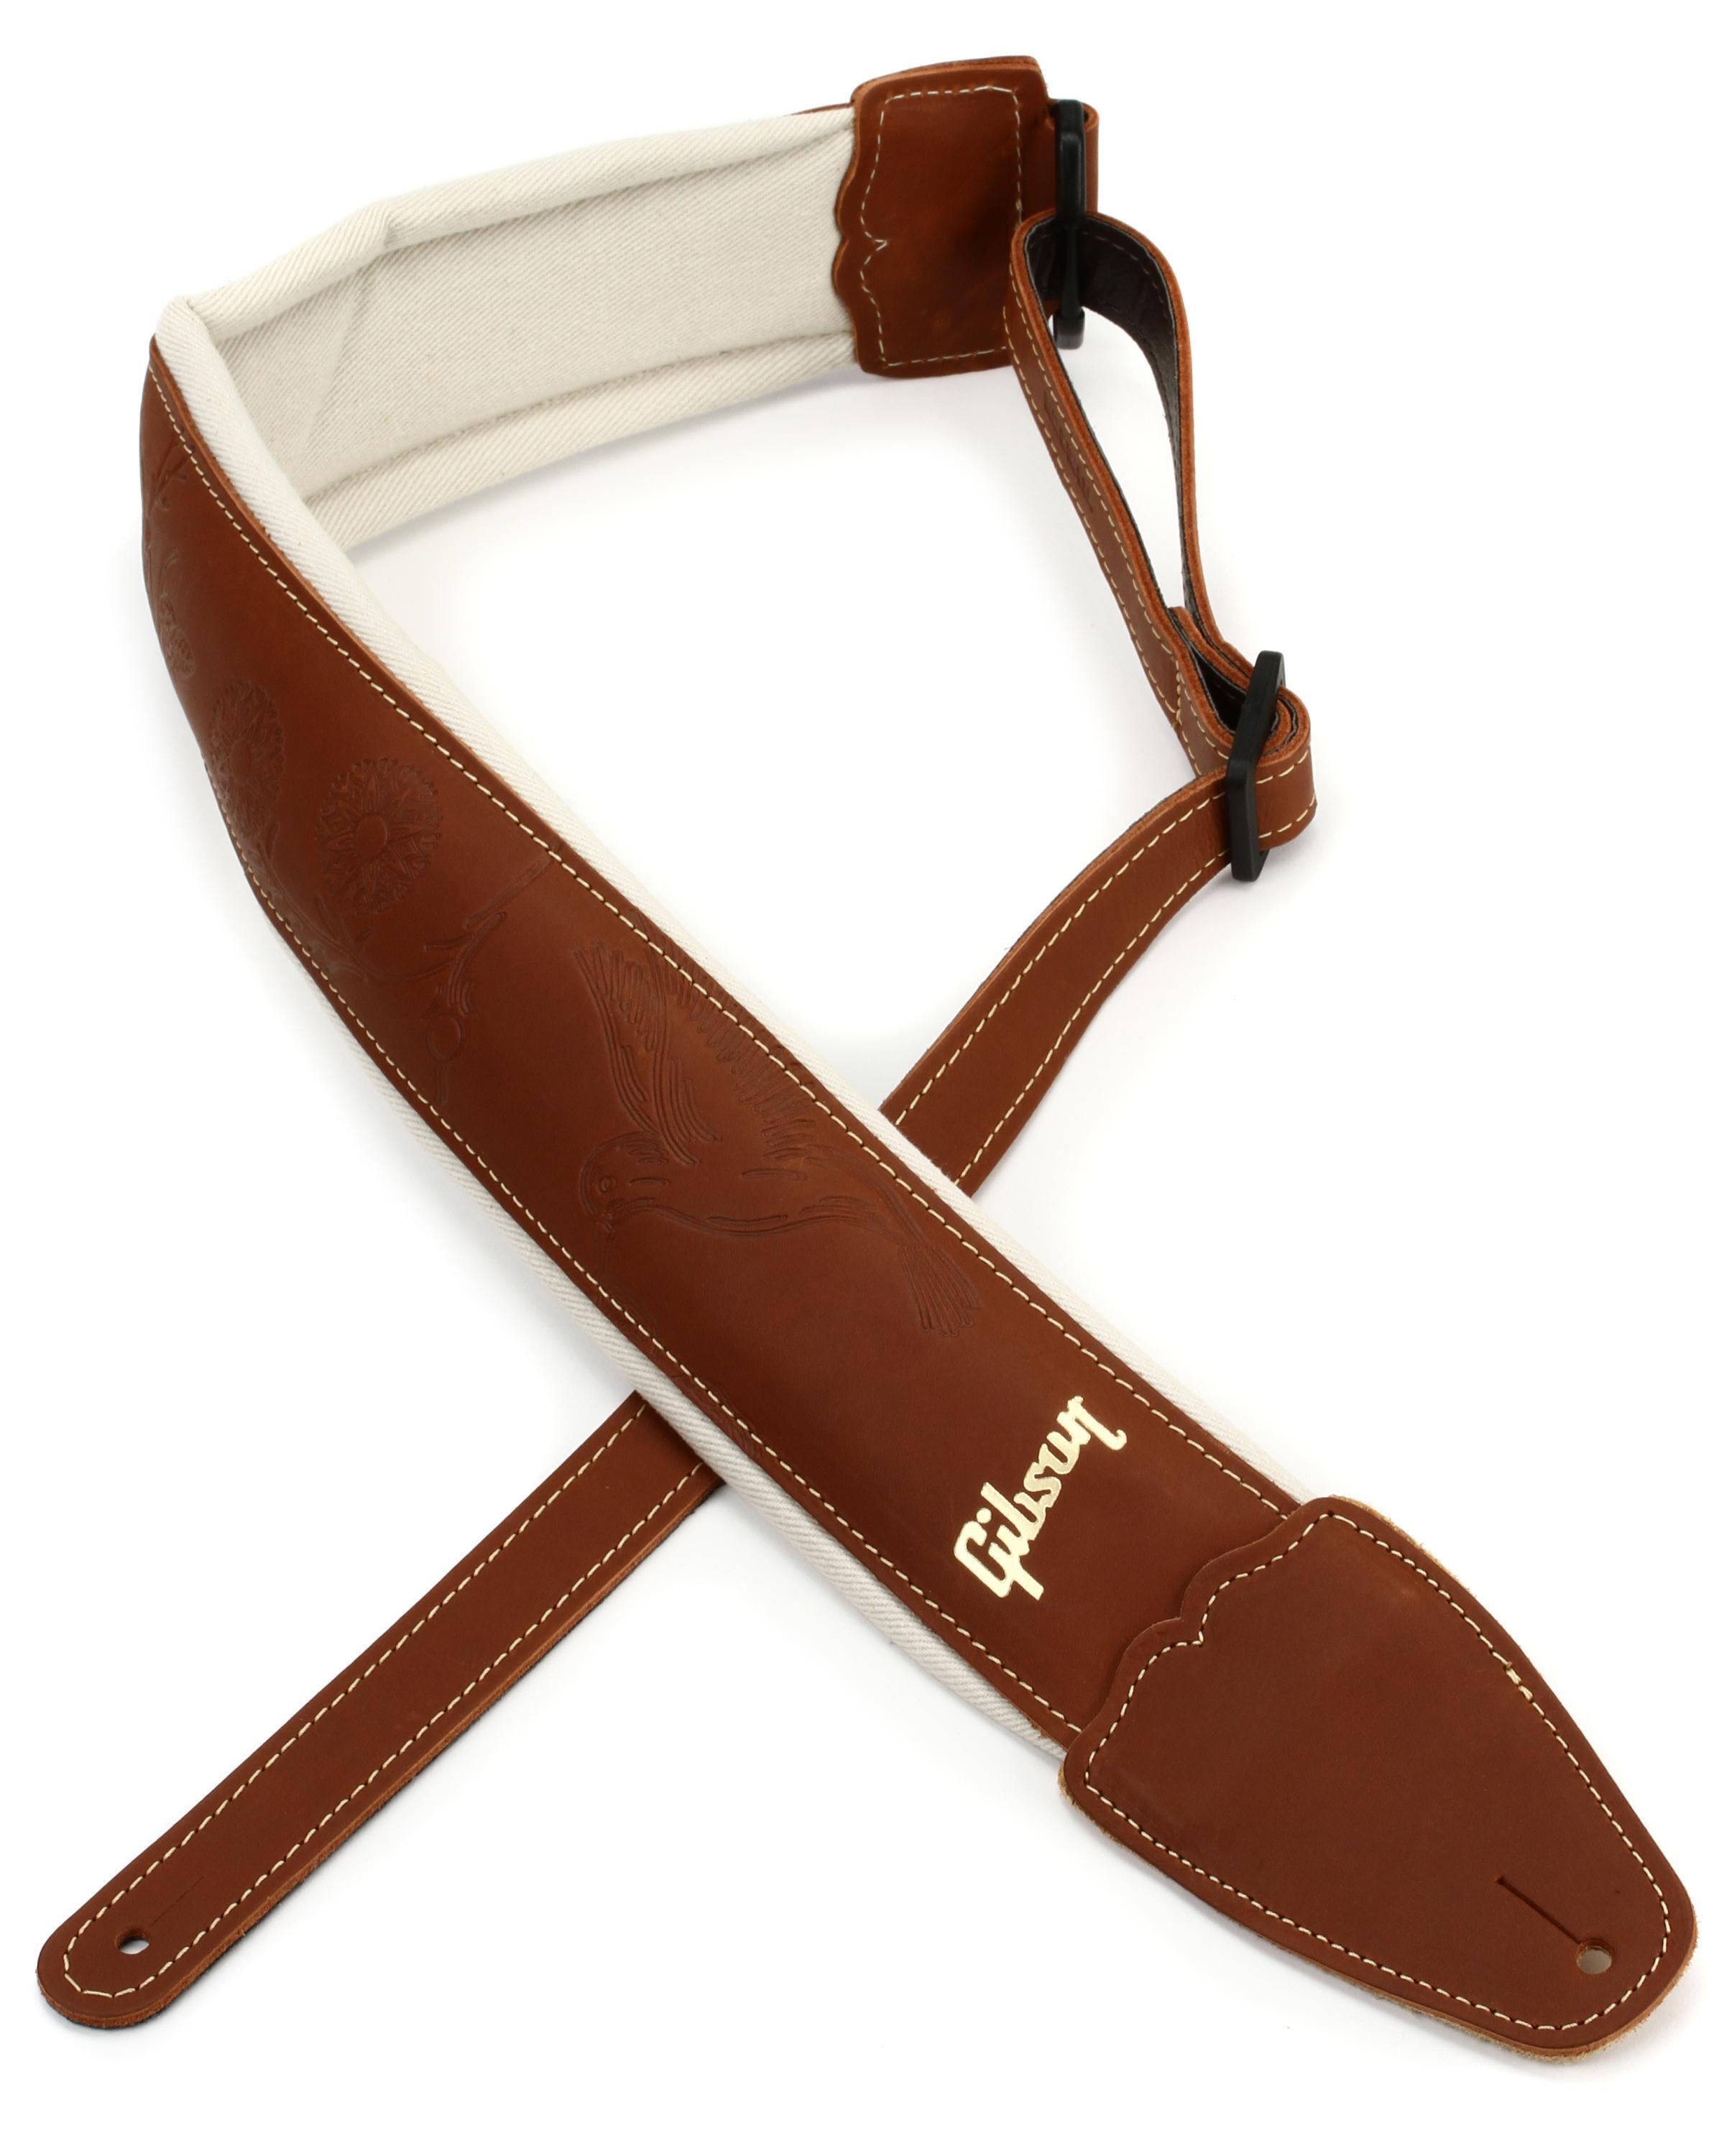 Handmade Leather Guitar Straps - The Duncan Africa Society & Guitar Co.